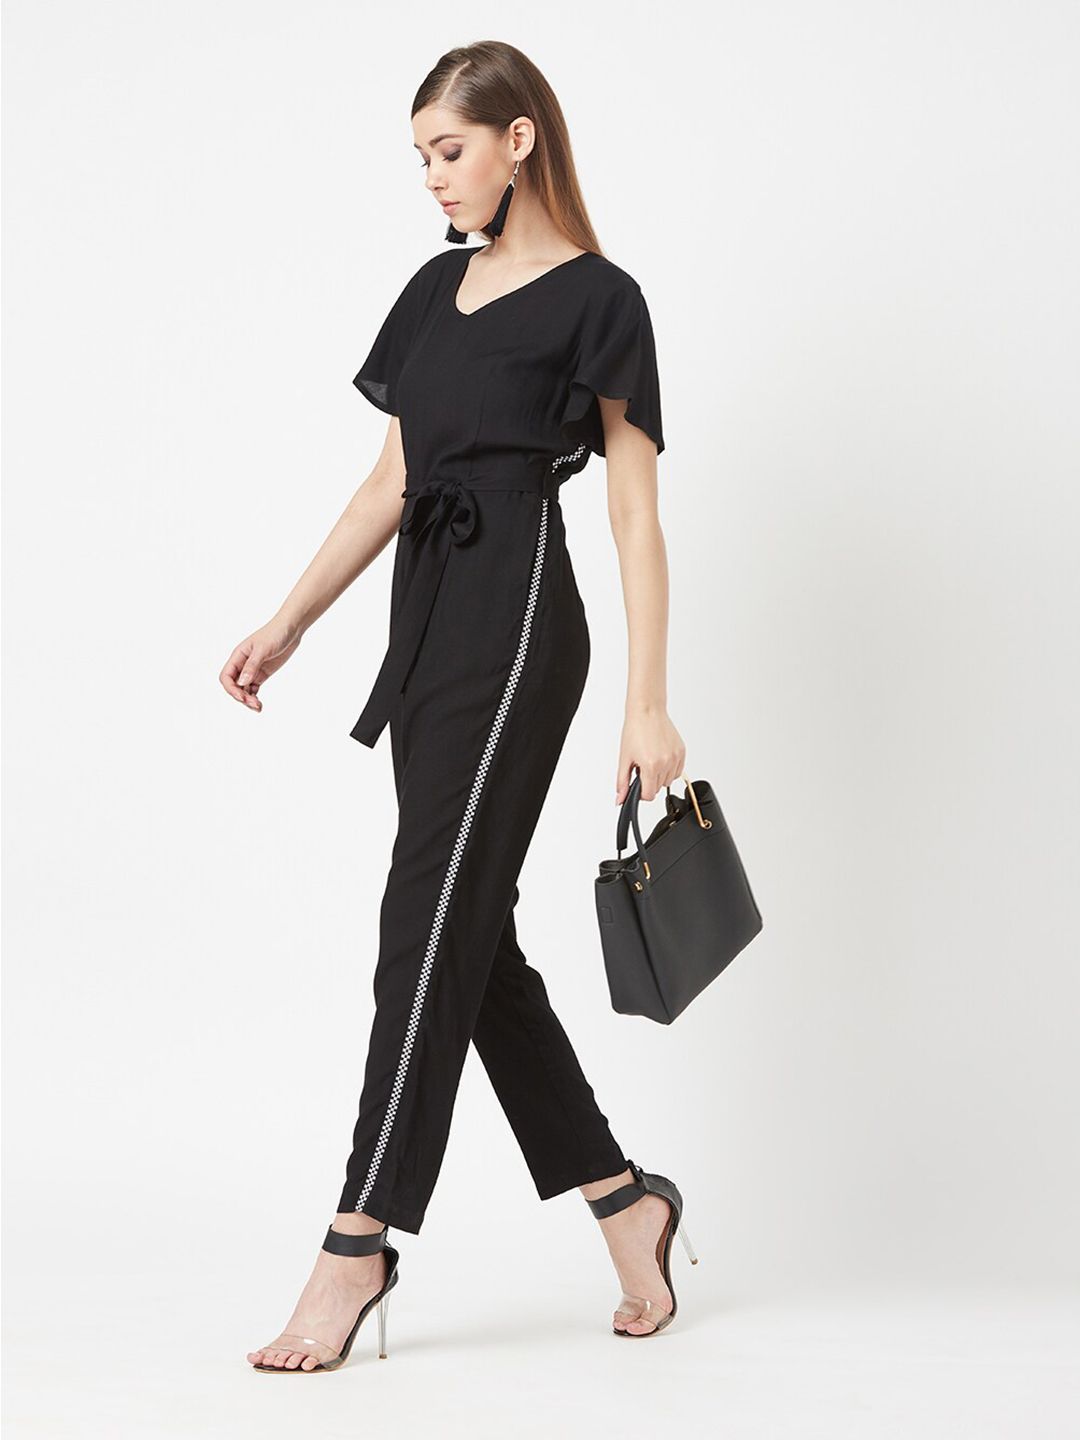 Miss Chase Black Basic Jumpsuit with Ruffles Price in India